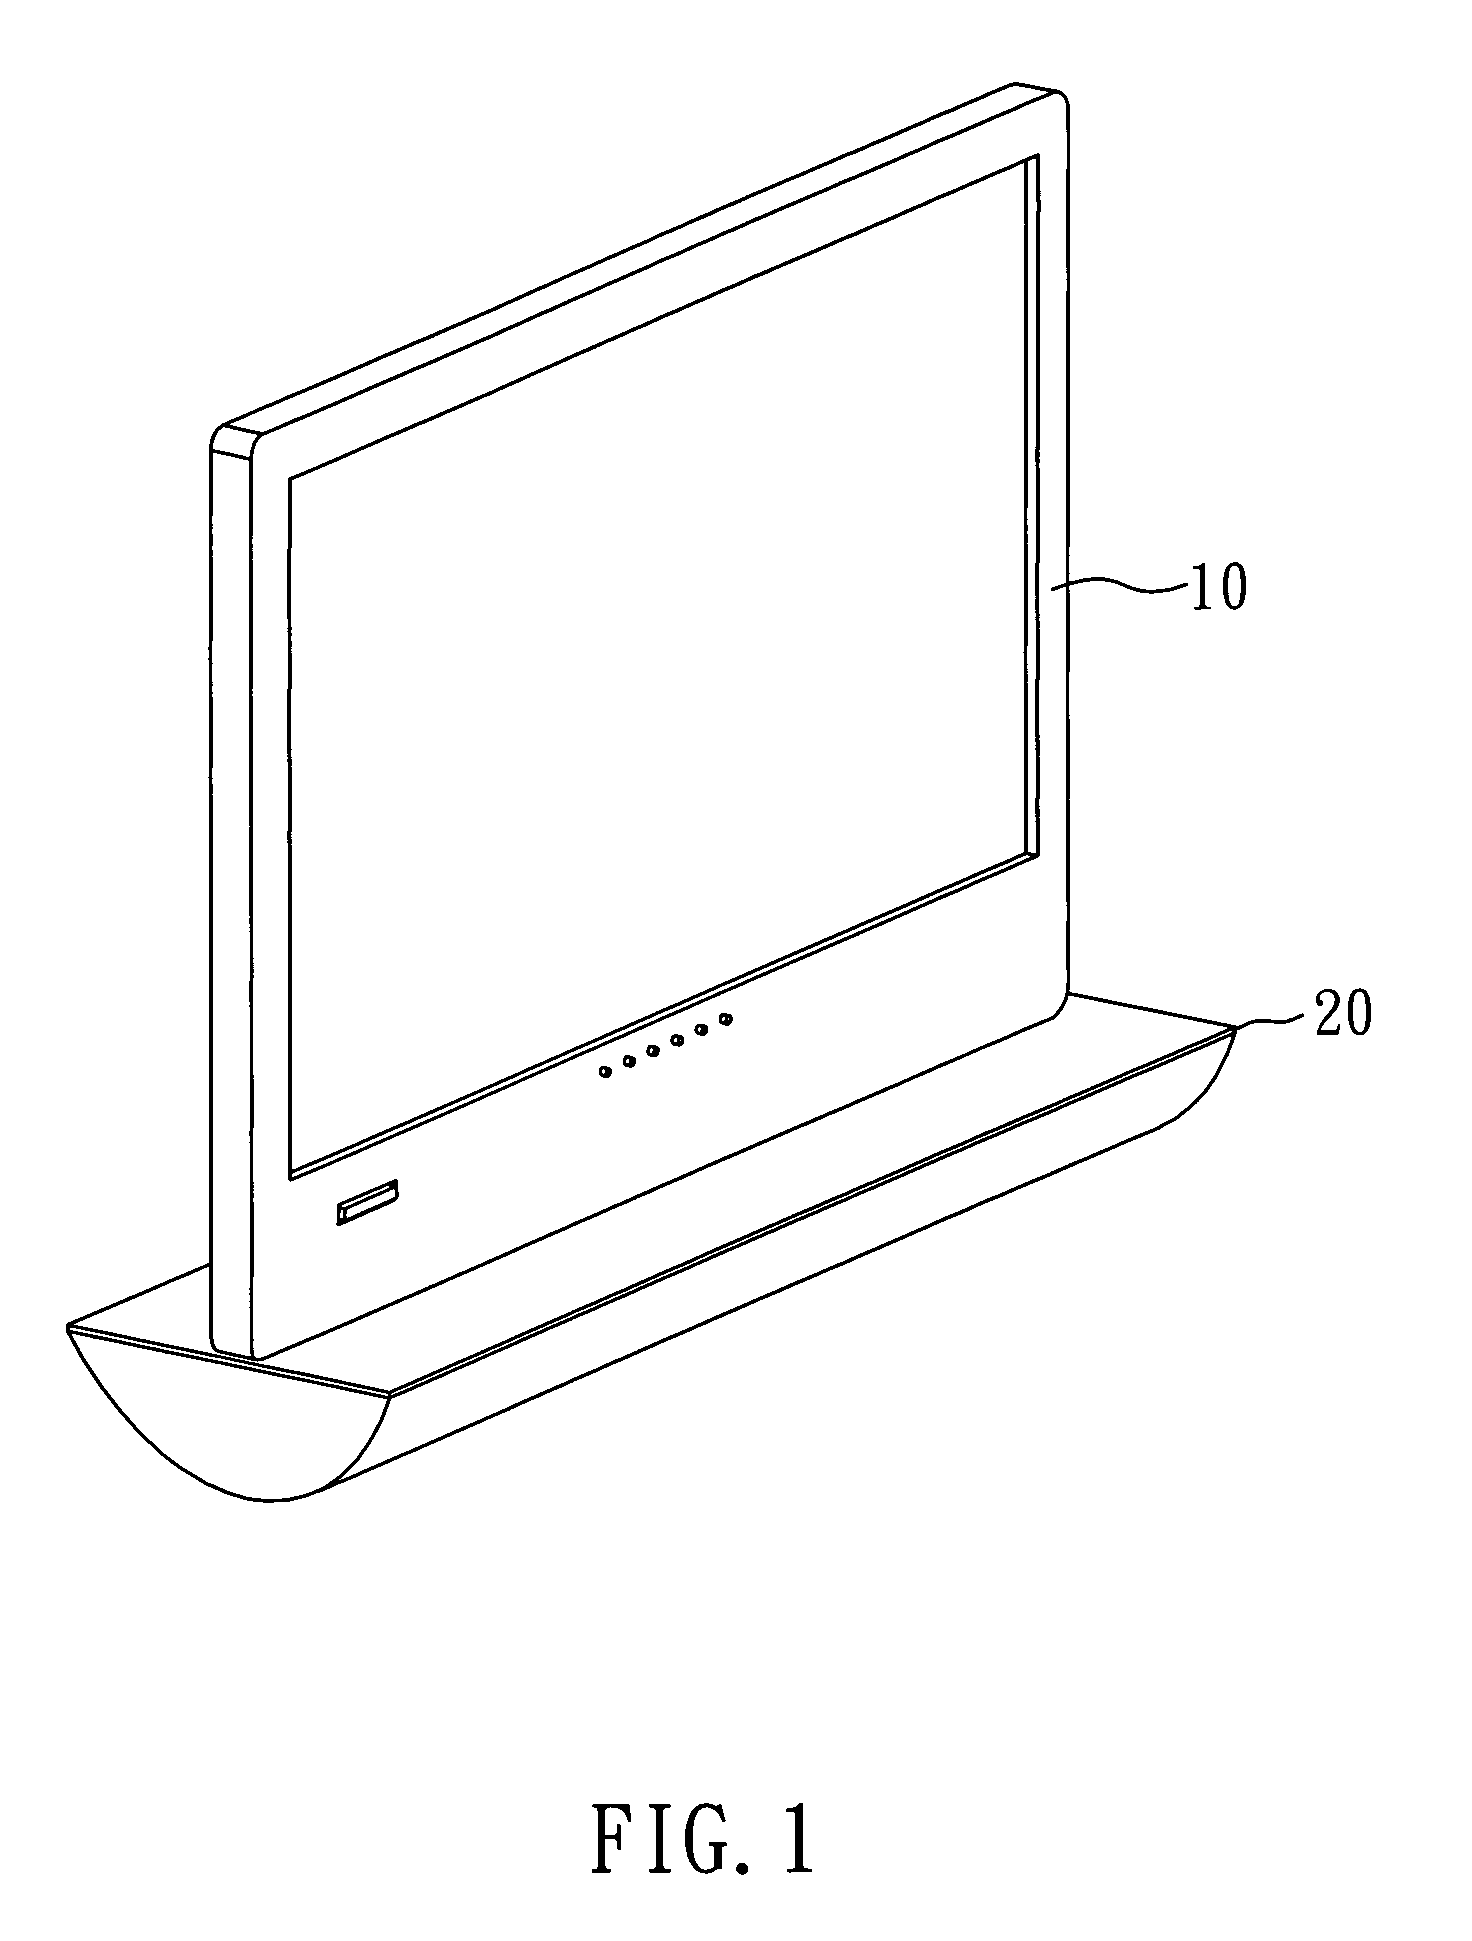 Display with a fluid balance structure